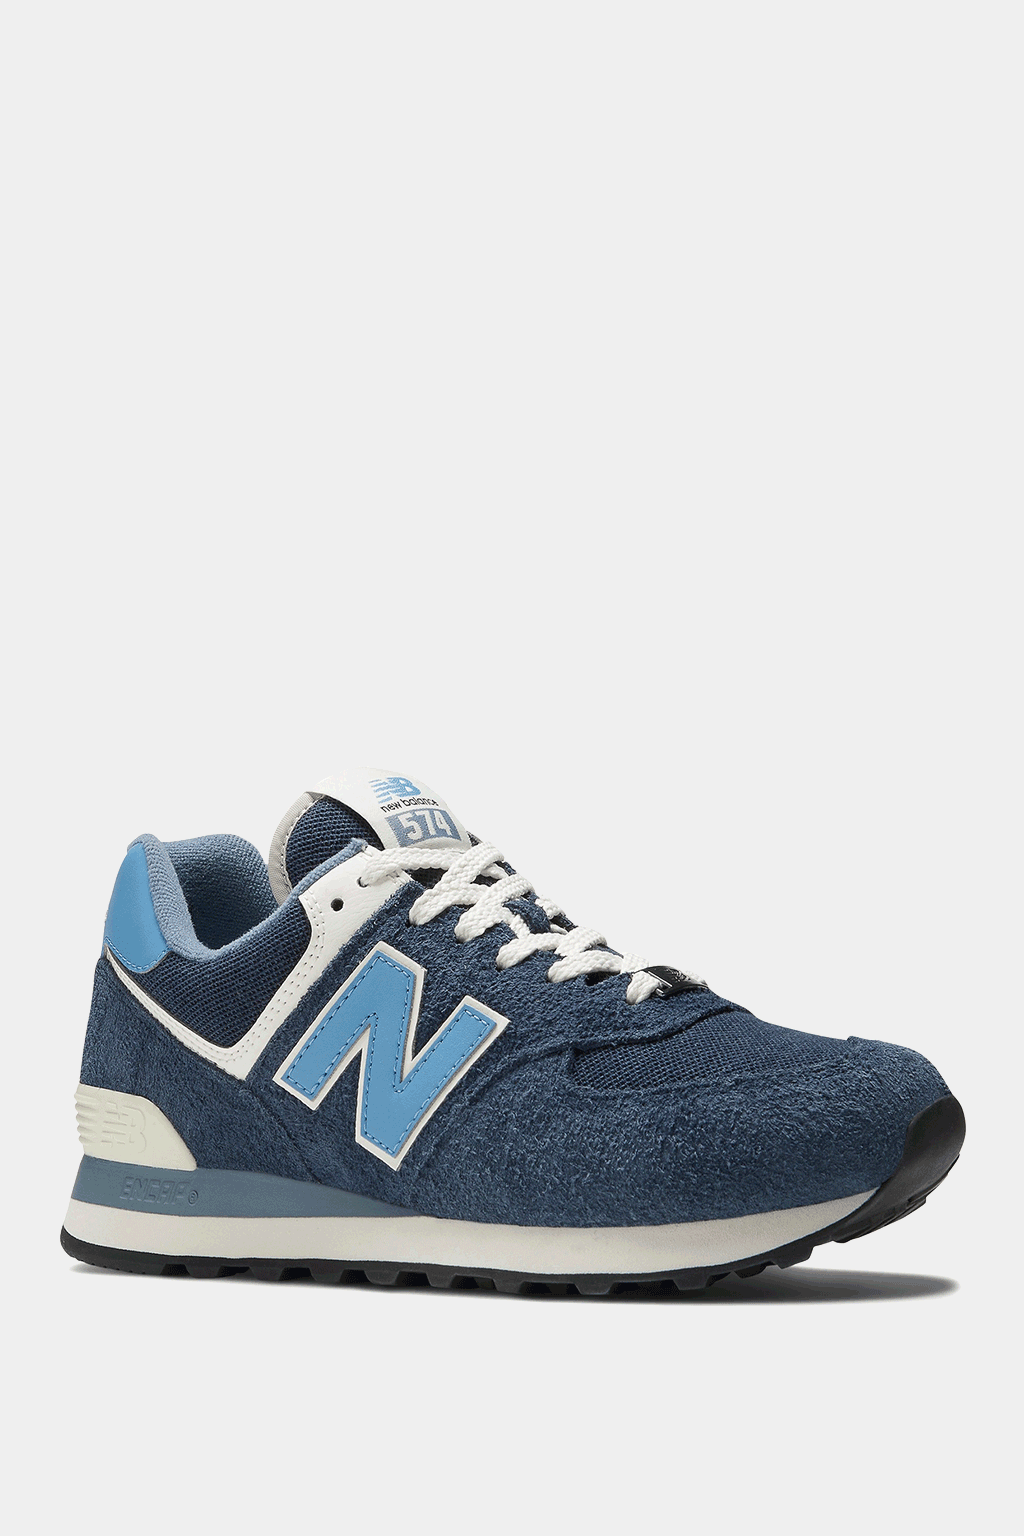 New Balance - 574 Unisex Sneakers Shoes